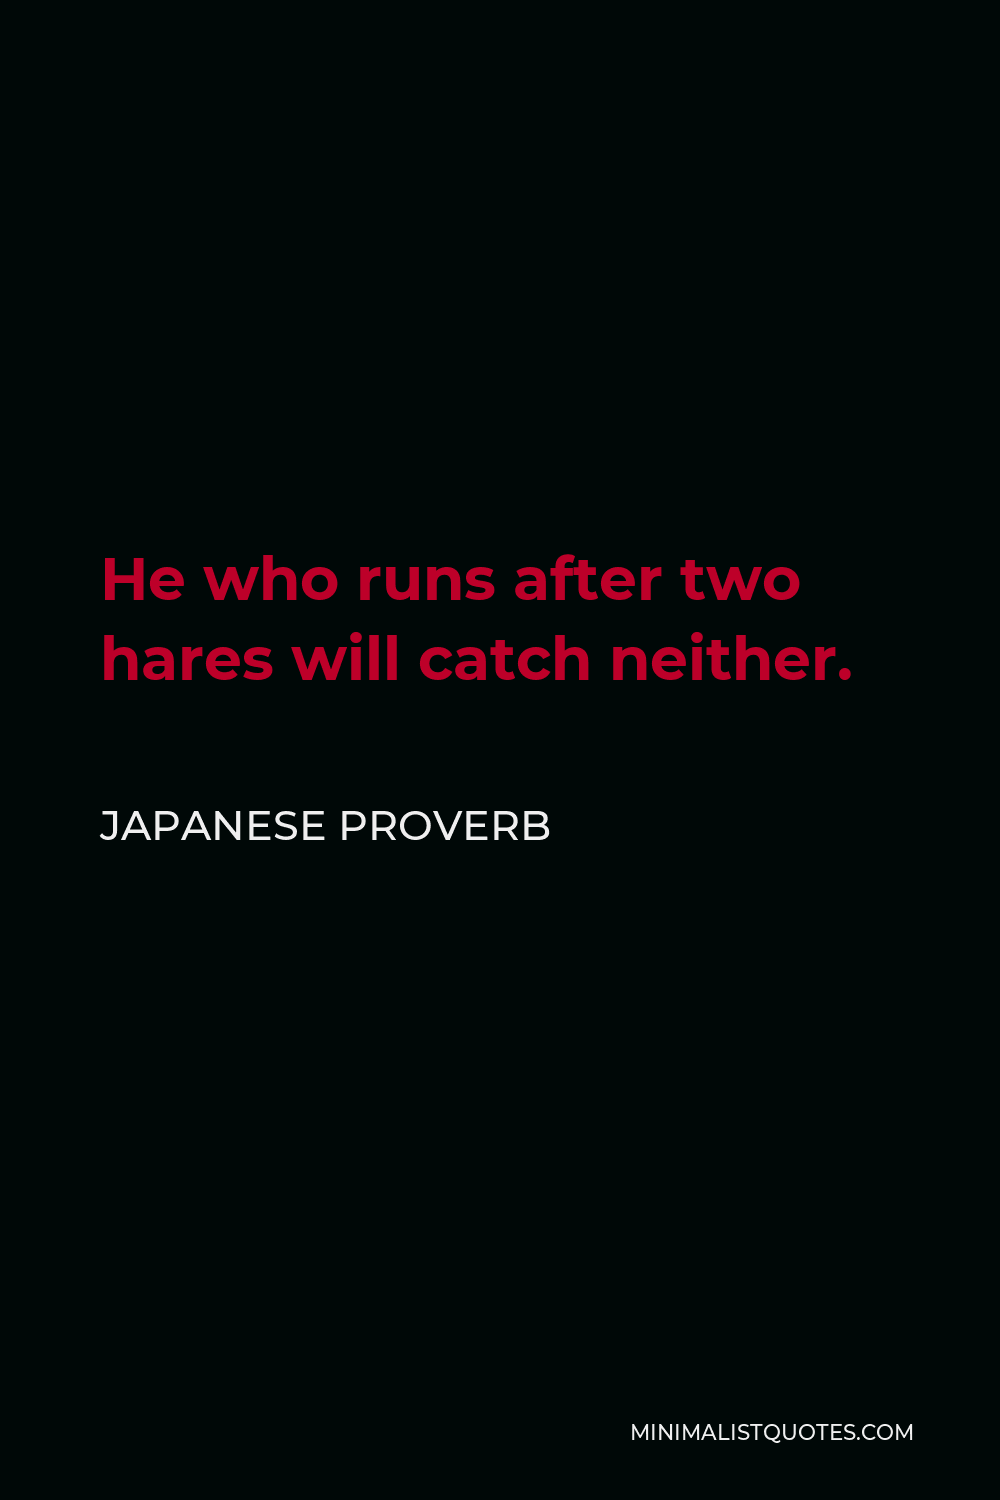 Japanese Proverb Quote - He who runs after two hares will catch neither.